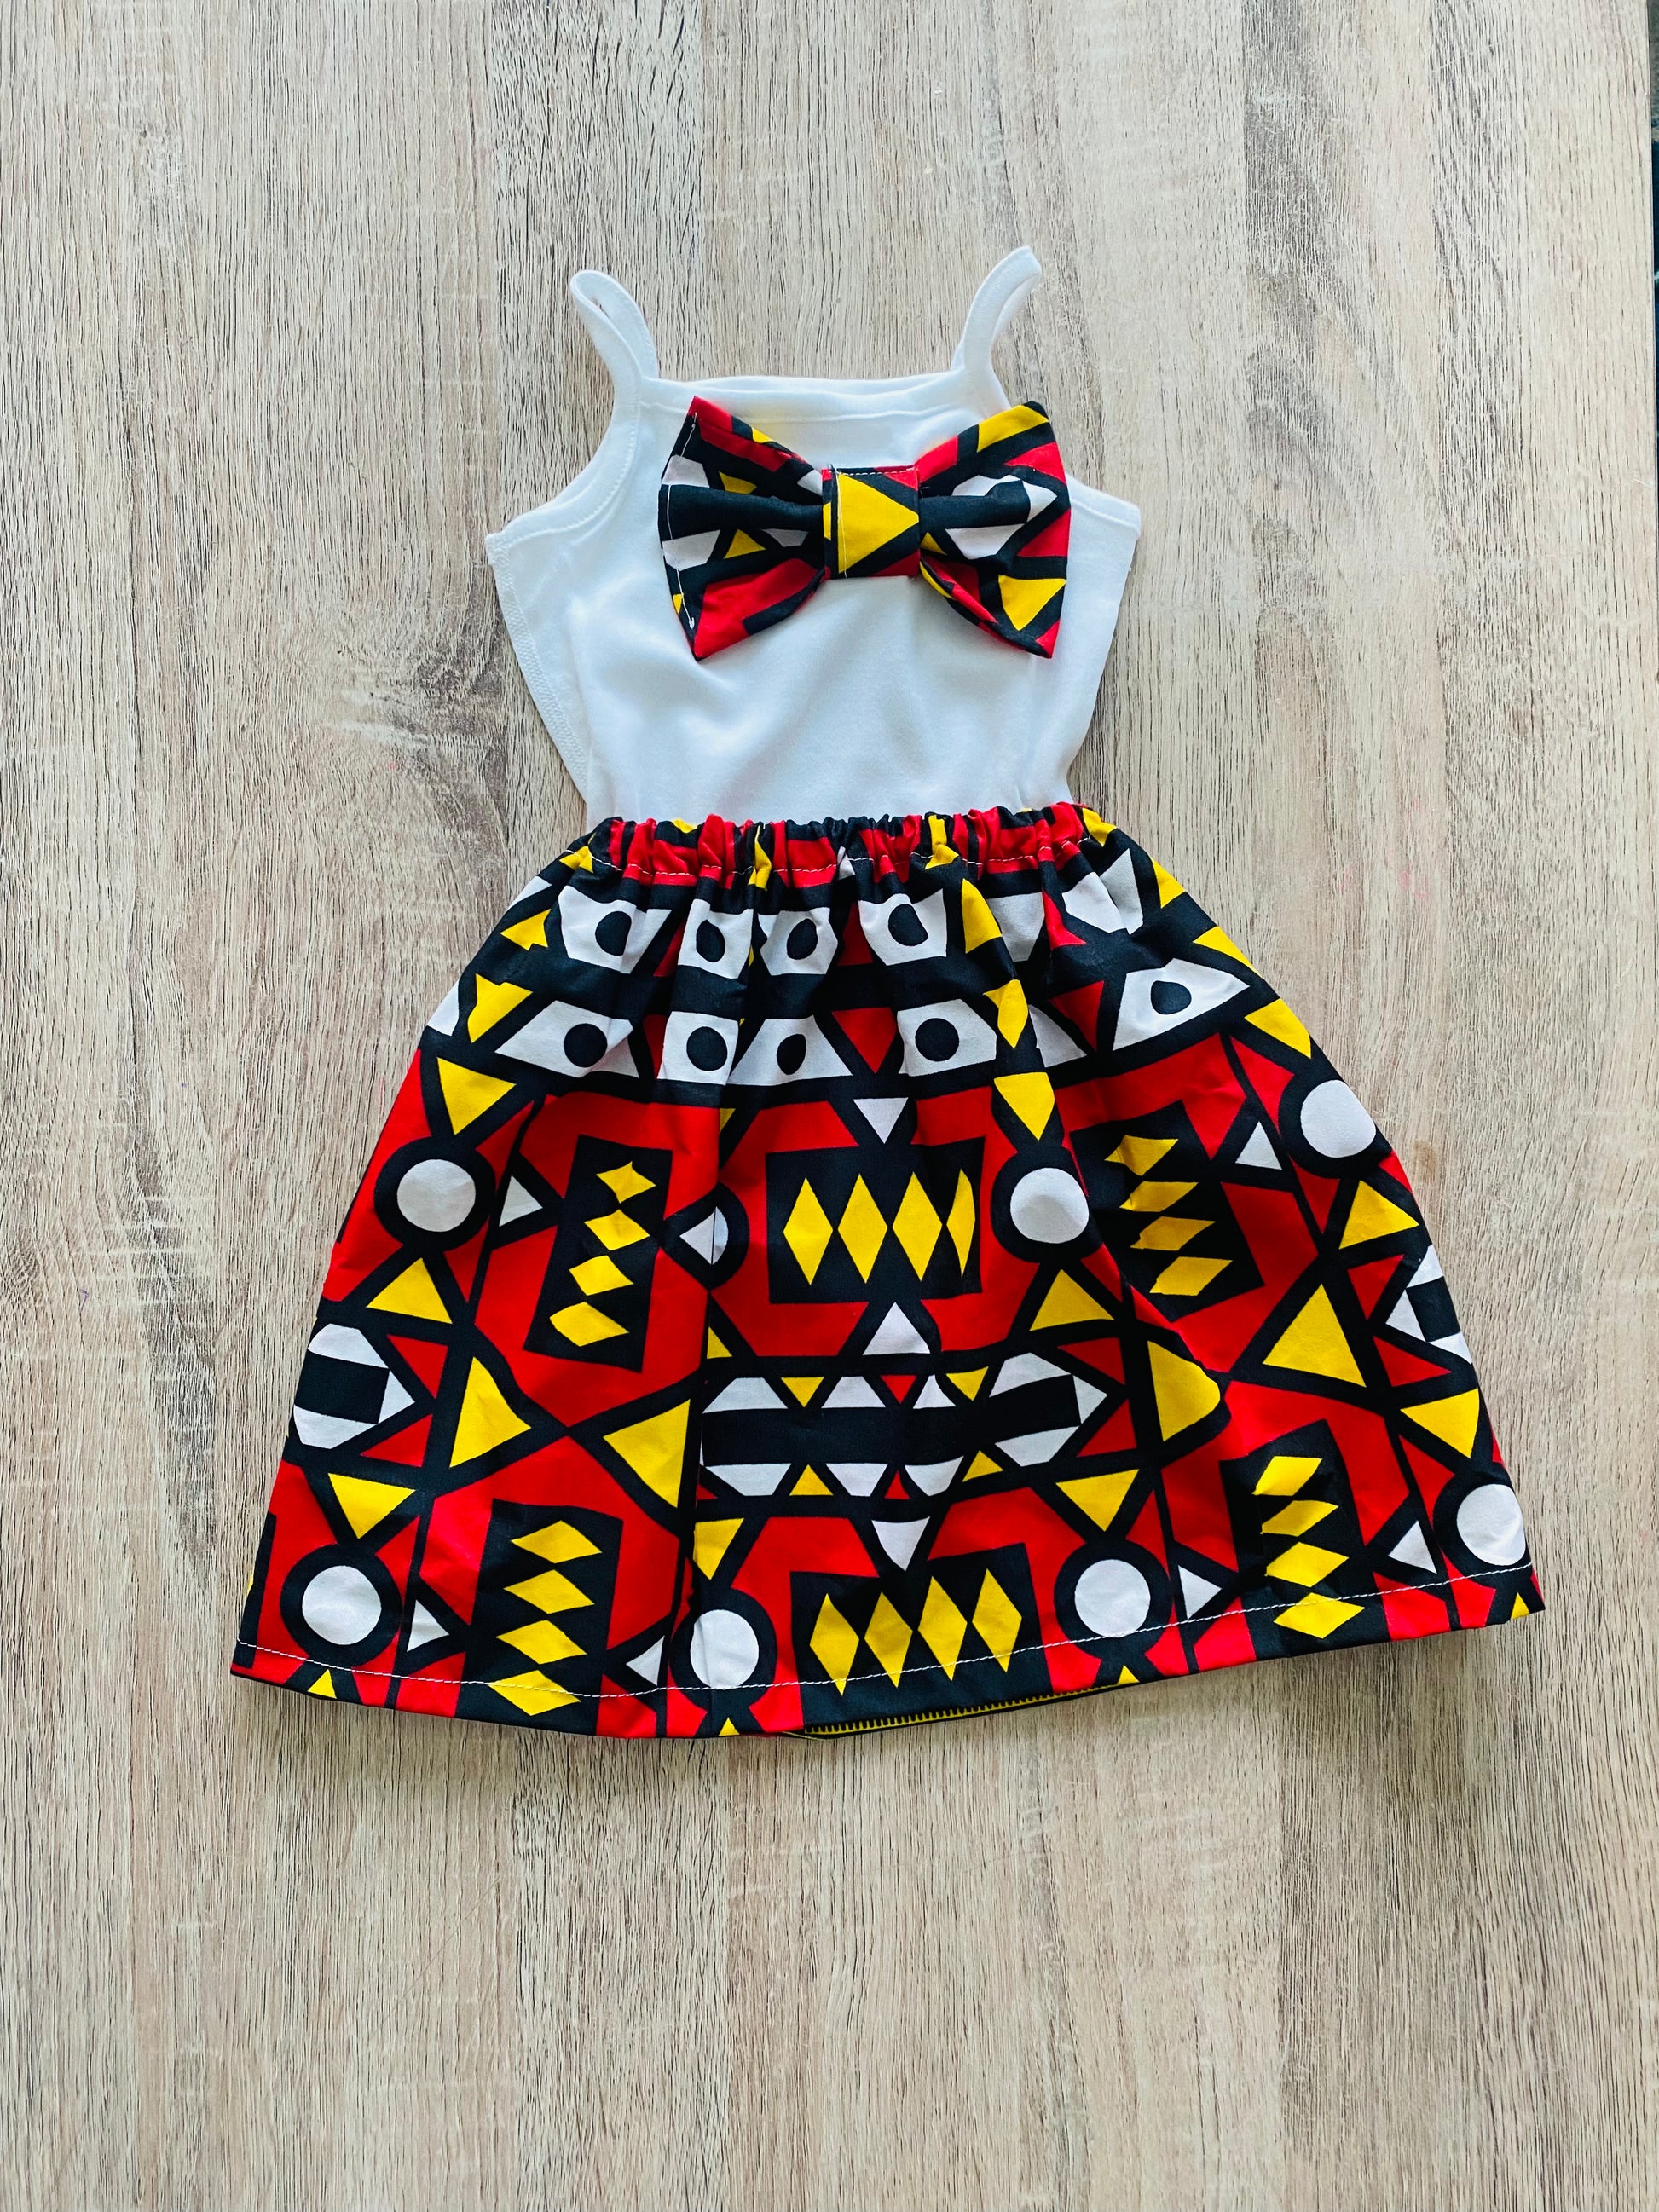 Robe africaine enfant – Kaysol Couture